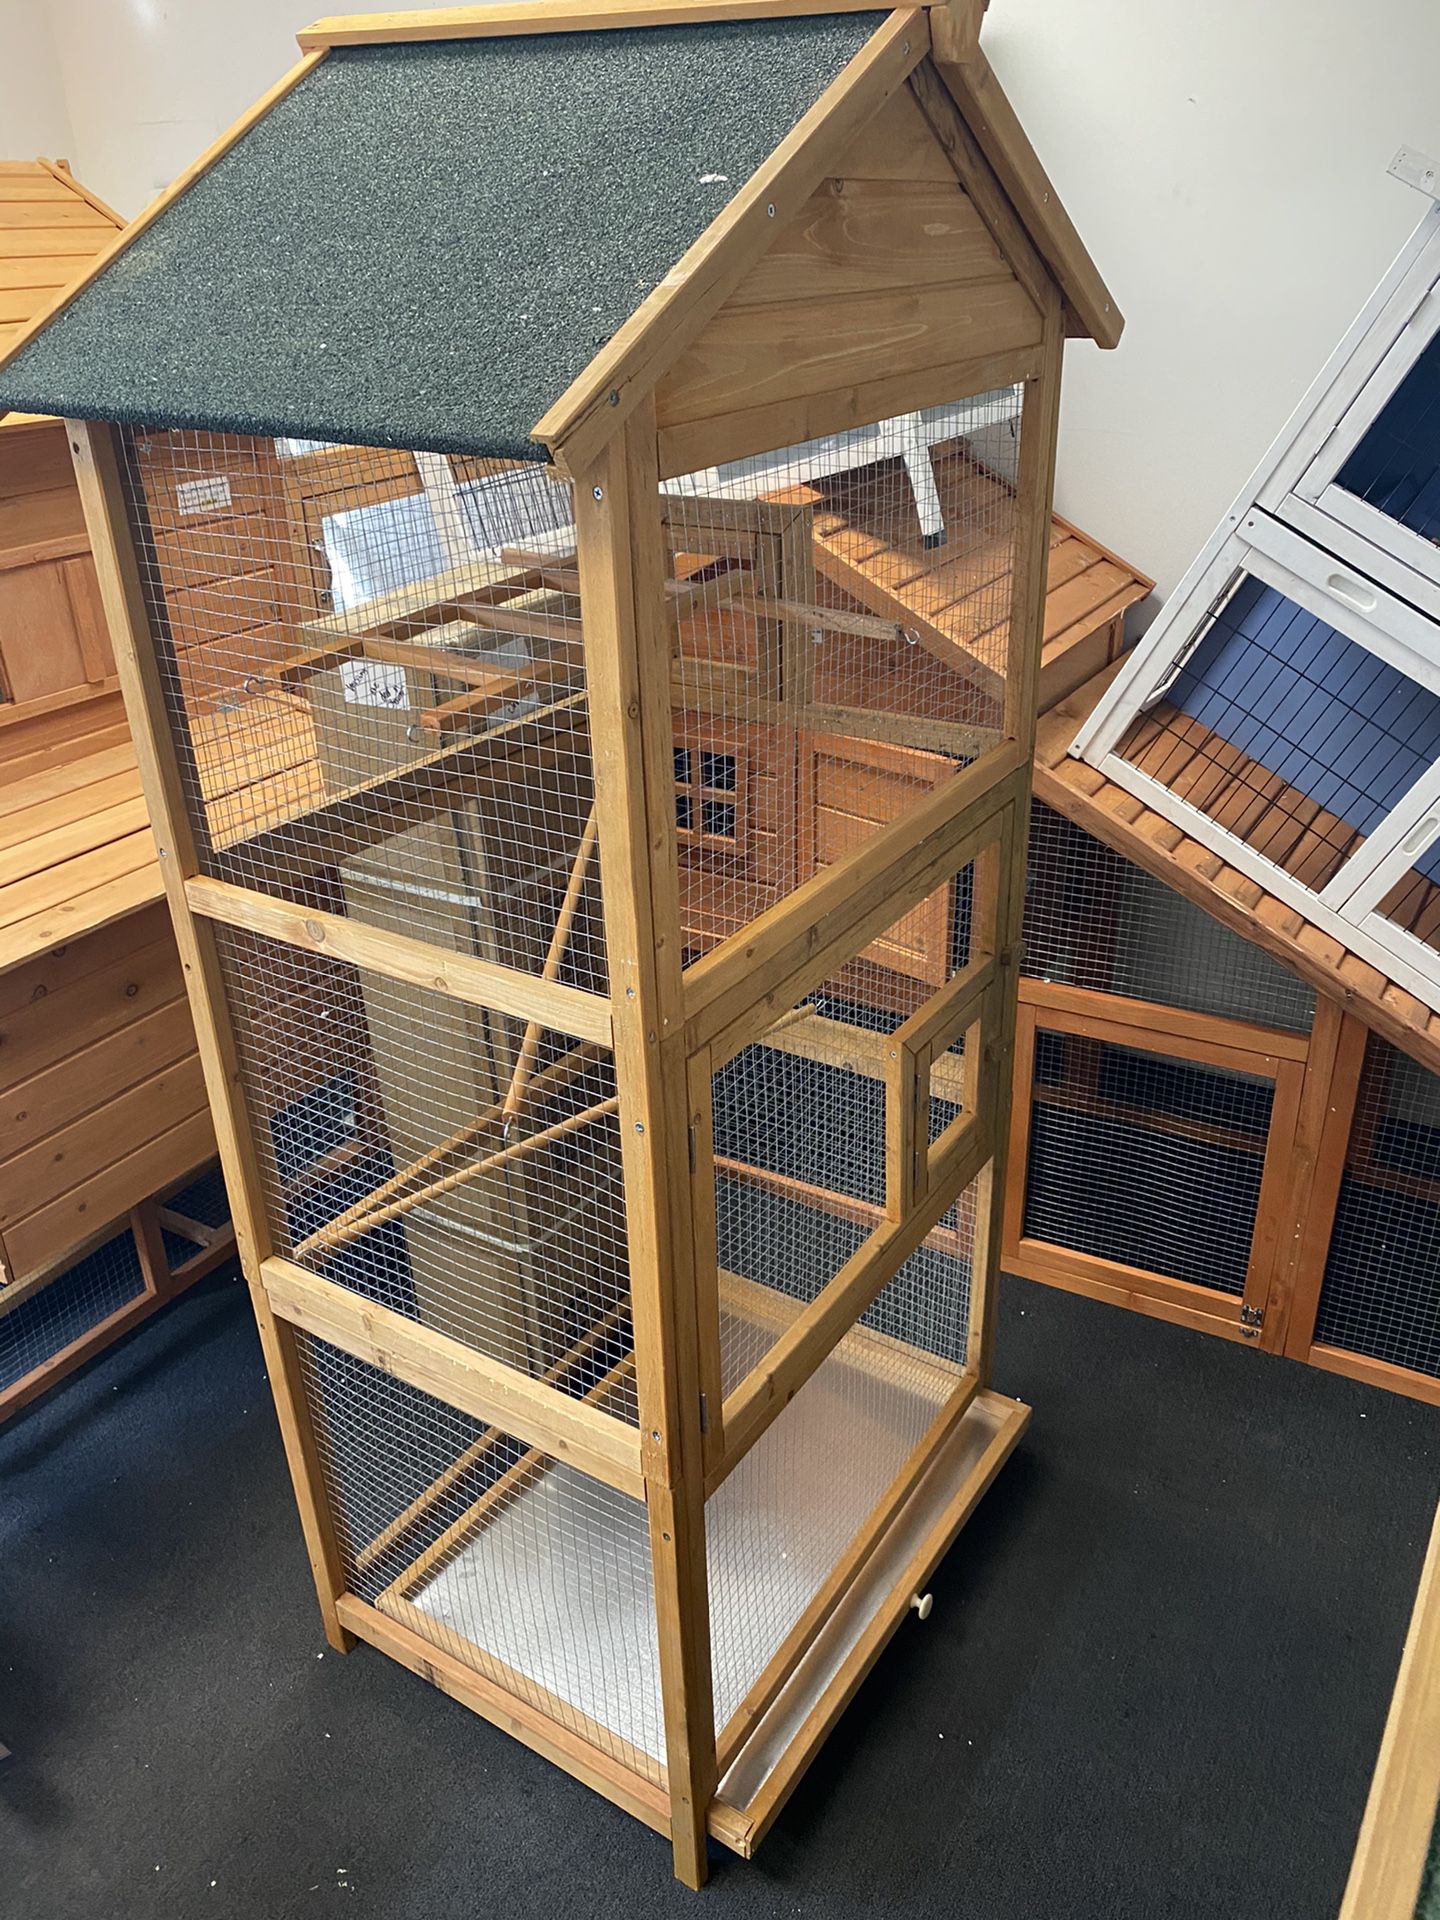 Lovupet 70" Wood Bird Cage Play House Parrot Finch Cockatoo Macaw Aviary Pet Supply 0011